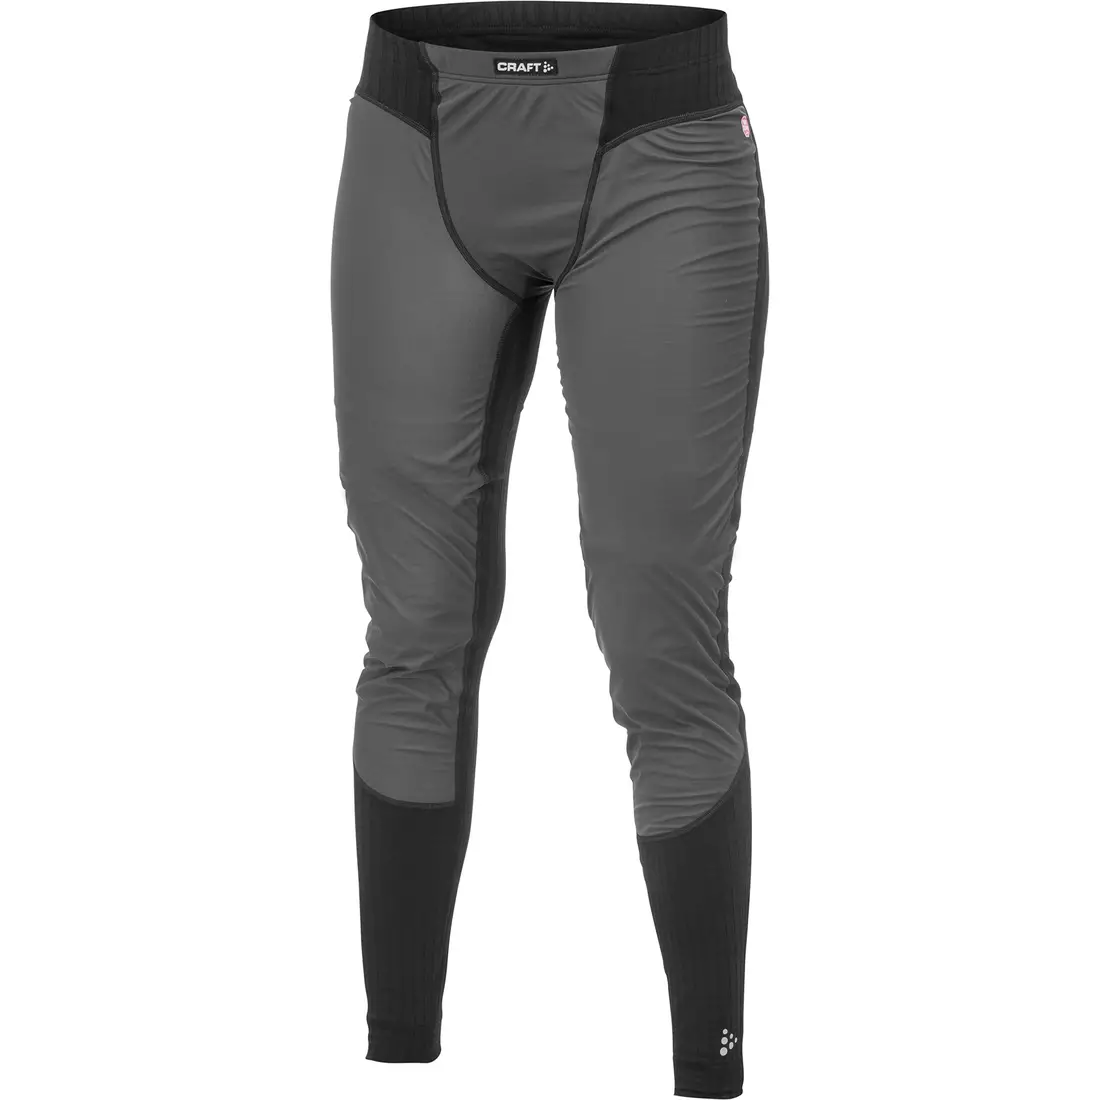 CRAFT ACTIVE EXTREME WINDSTOPPER 1901556-9920 - women's thermal pants